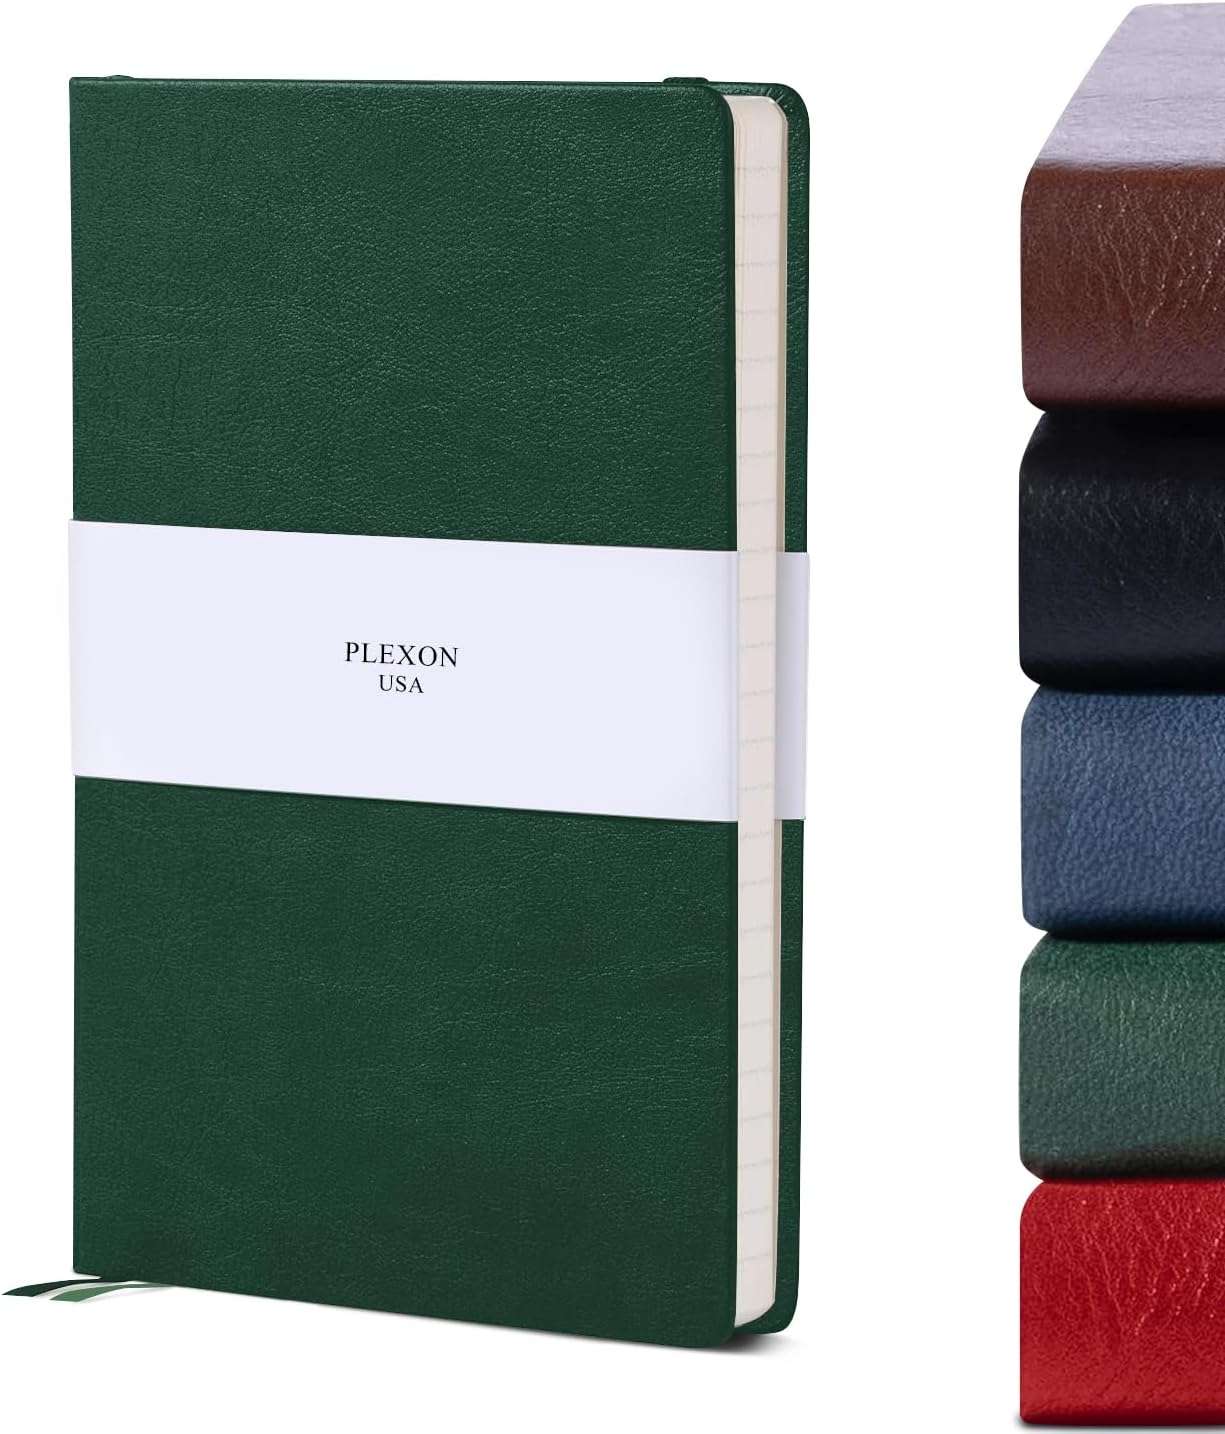 Emerald Green A5 Hardcover Vegan Leather Dotted Notebook with 120 gsm Cream Paper and Gift Box, 80 Sheets - 1